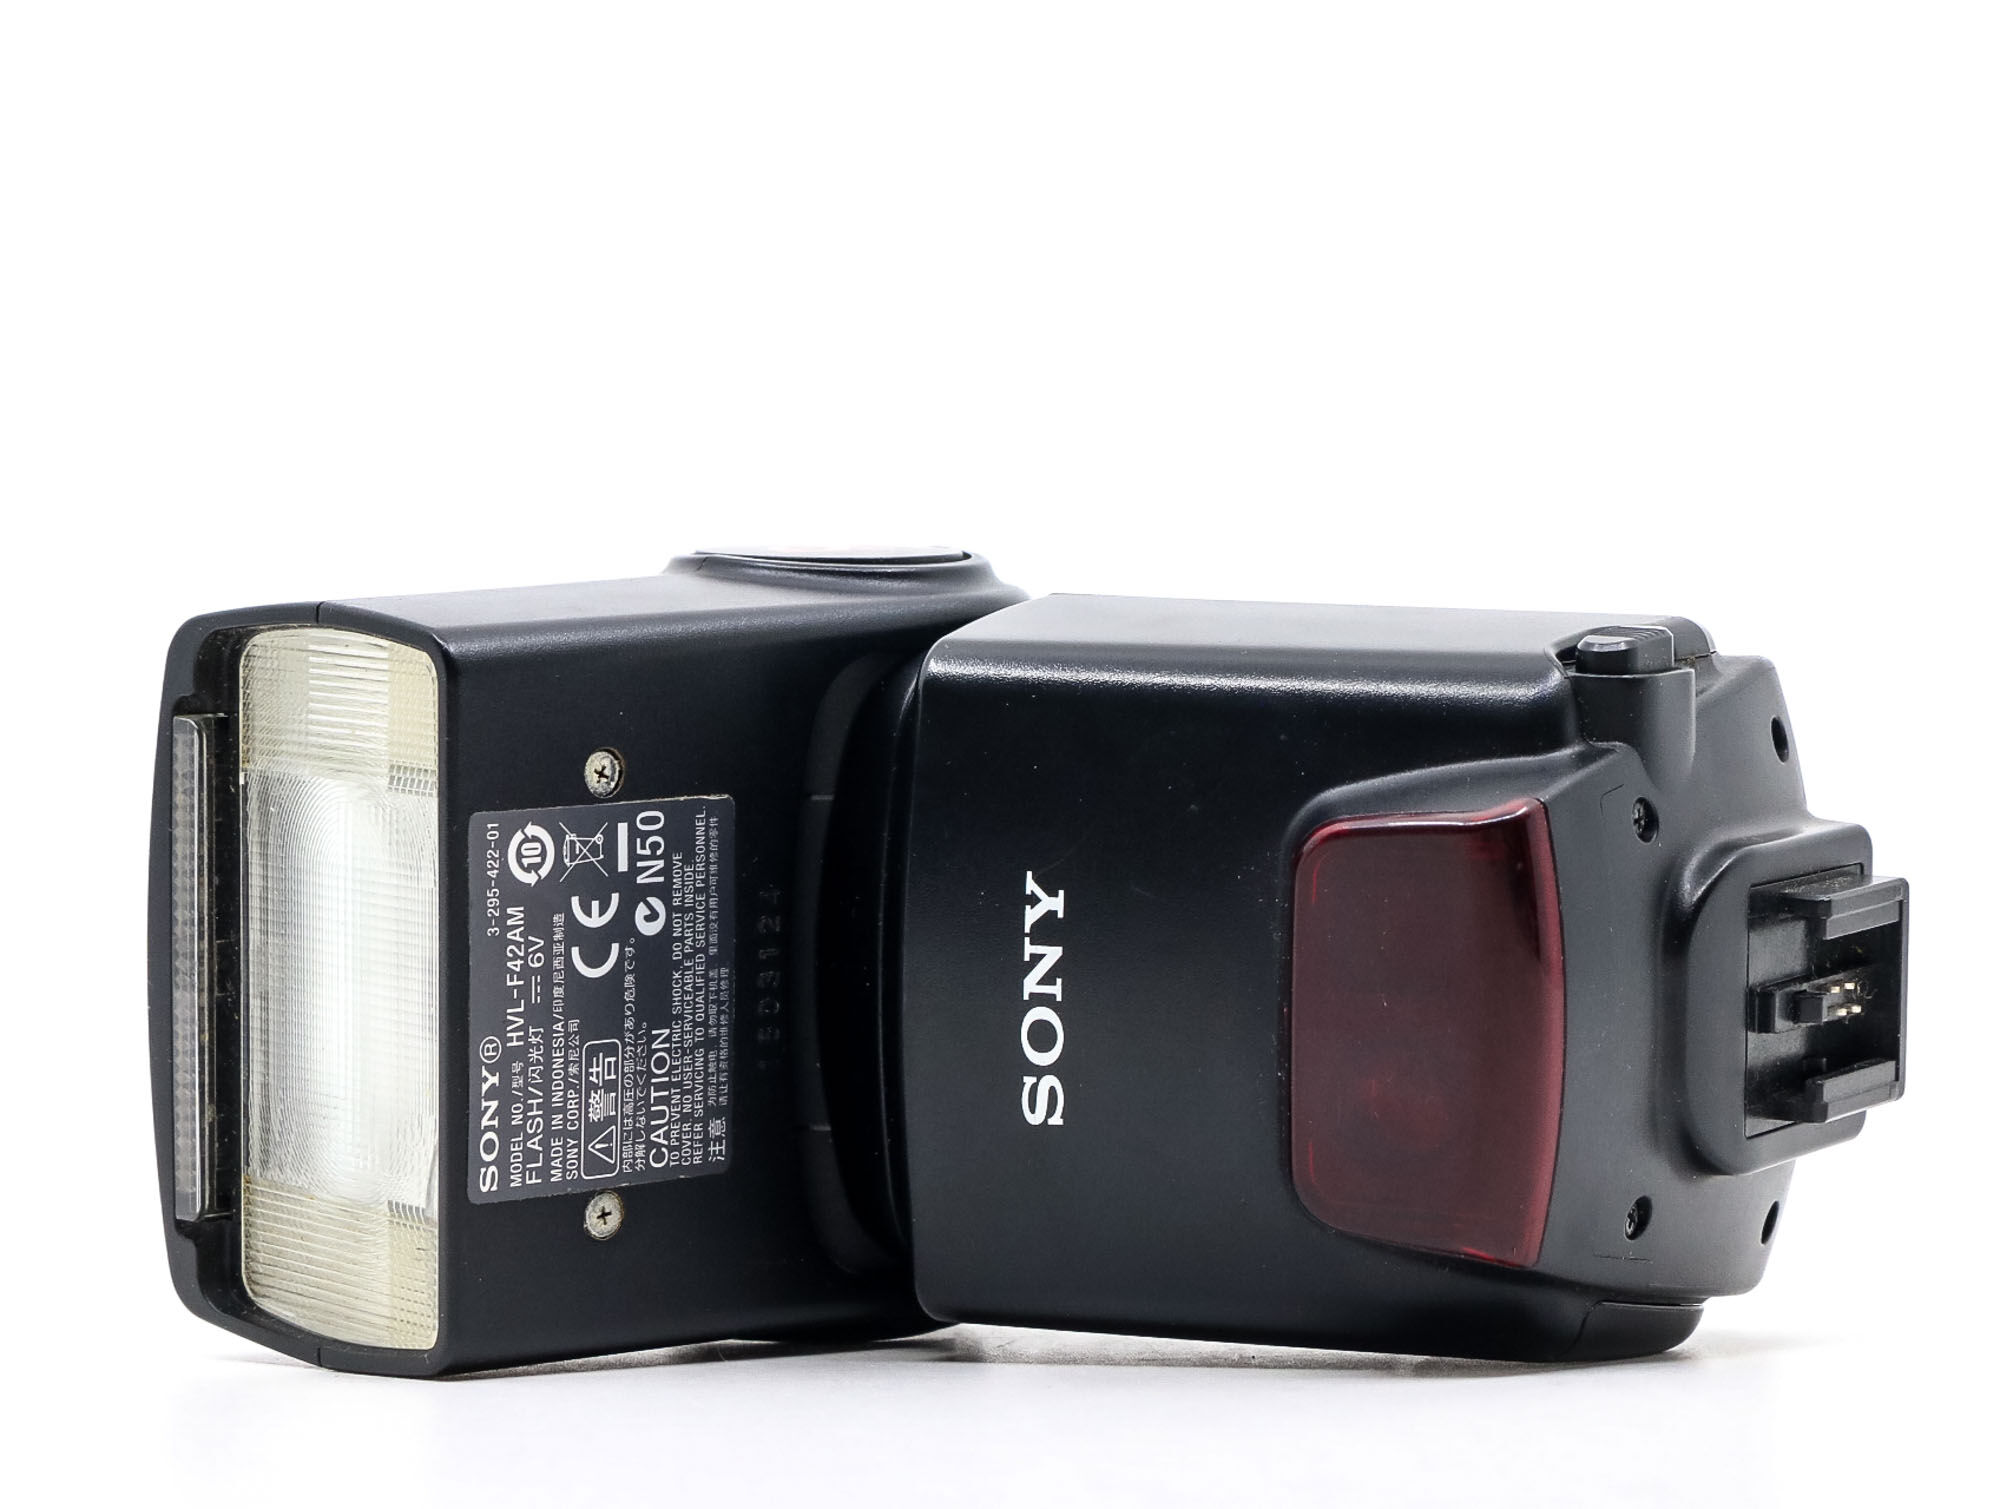 sony hvl-f42am flash (condition: well used)